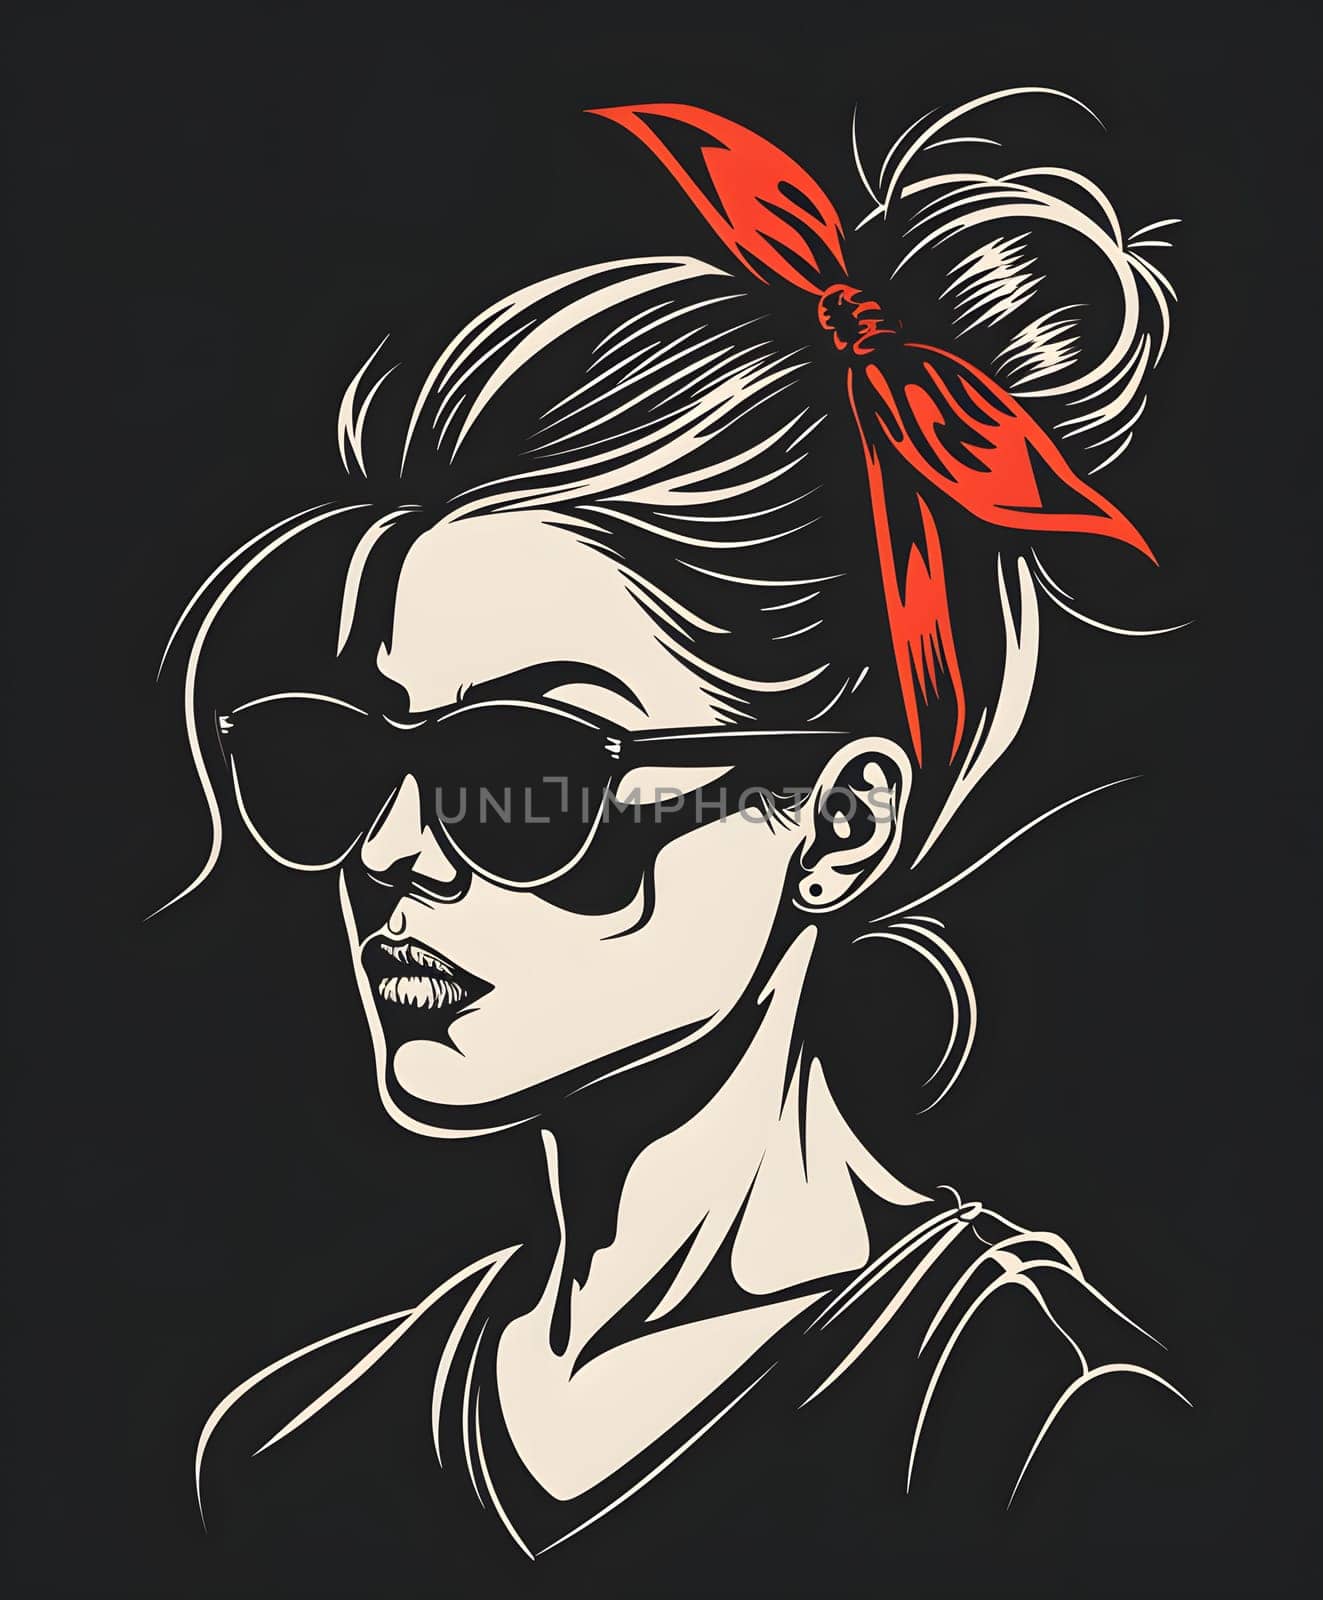 A stylish woman with sunglasses and a red bow in her hair, showcasing the importance of vision care and eyewear as accessories in visual arts and human body expression